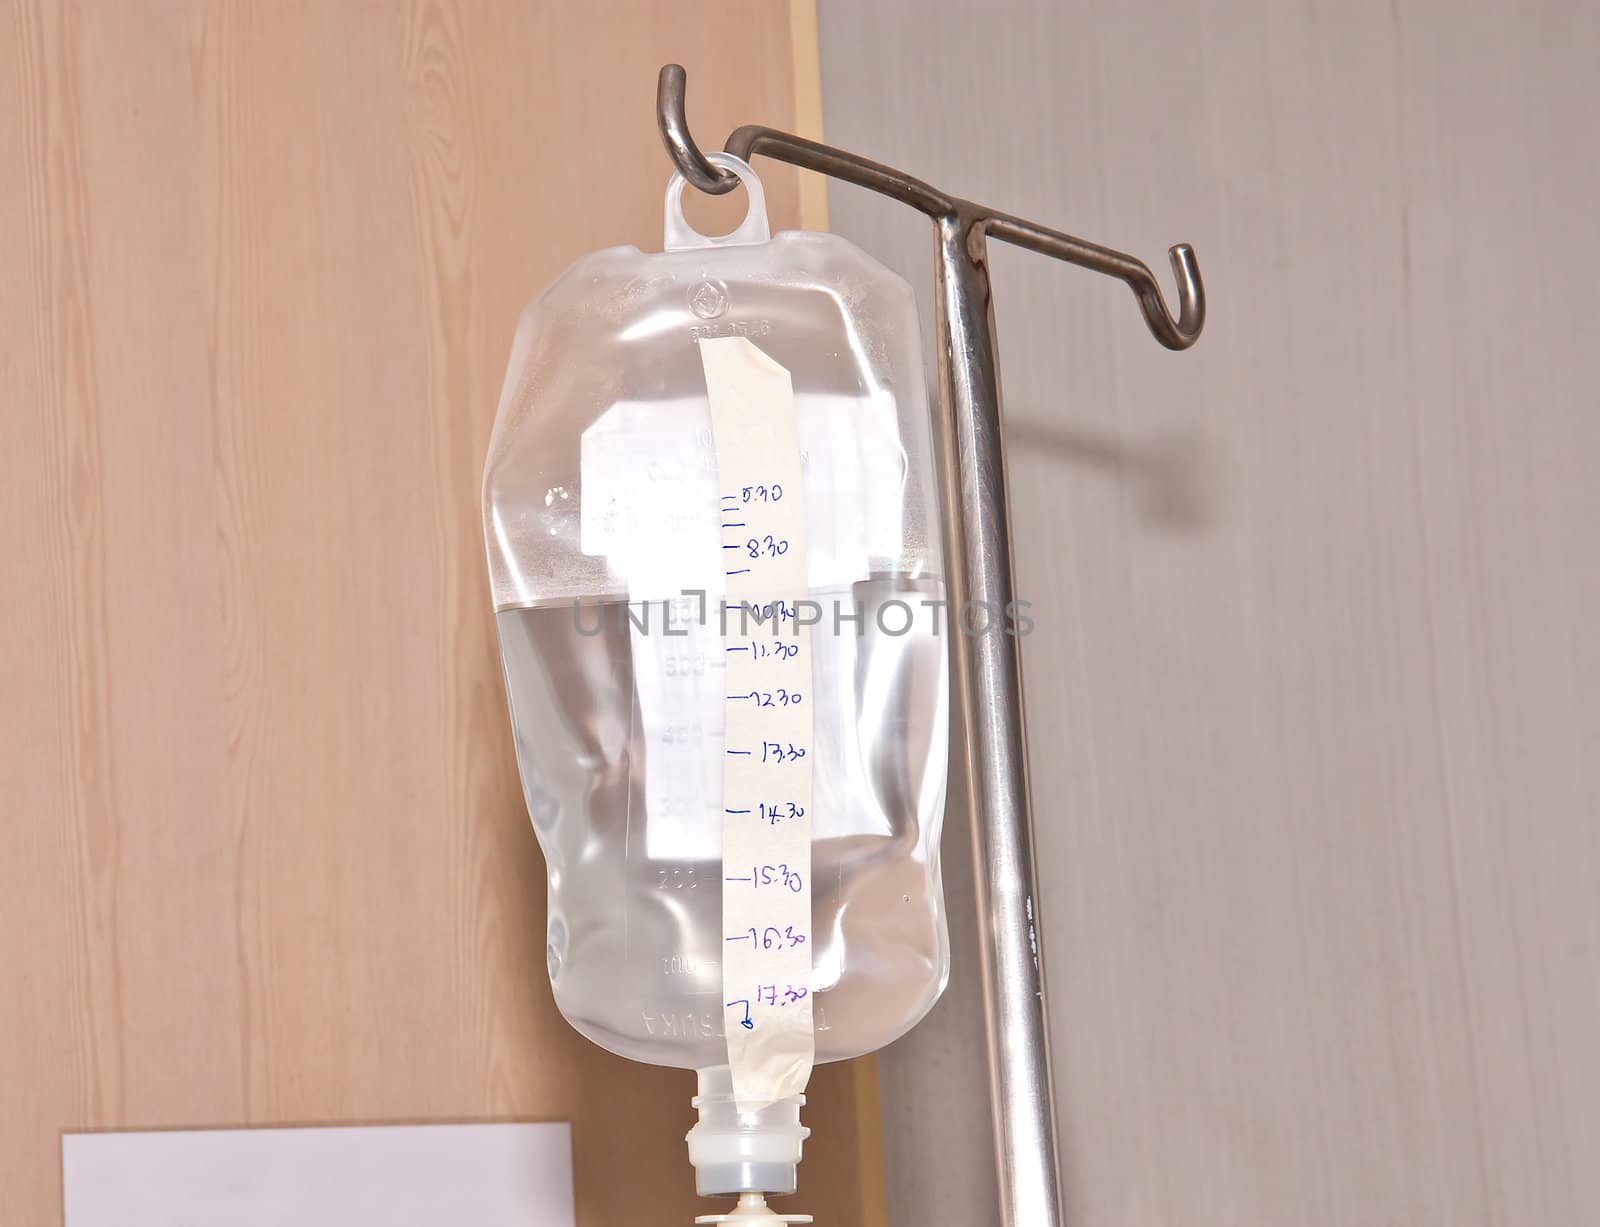 Saline bag or Intravenous therapy